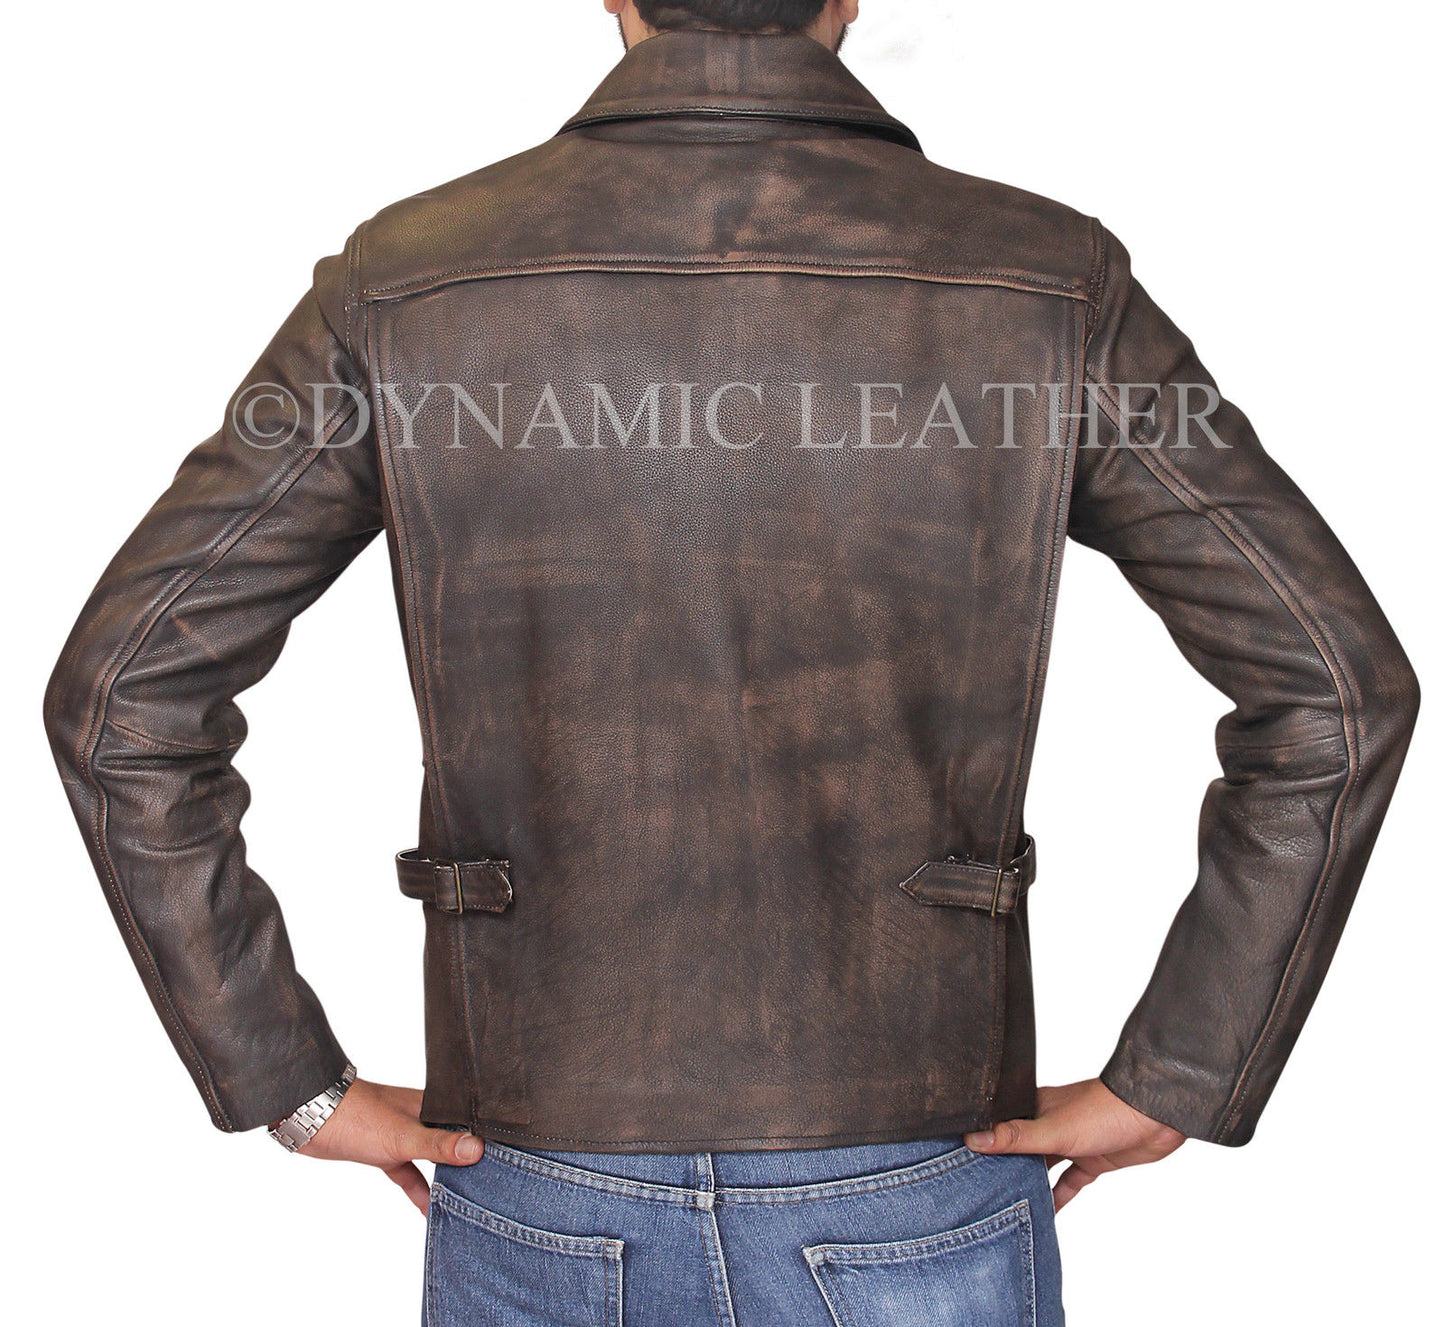 Indiana Jones Harrison Ford Classic Genuine Cow Hide Distressed Leather Jacket